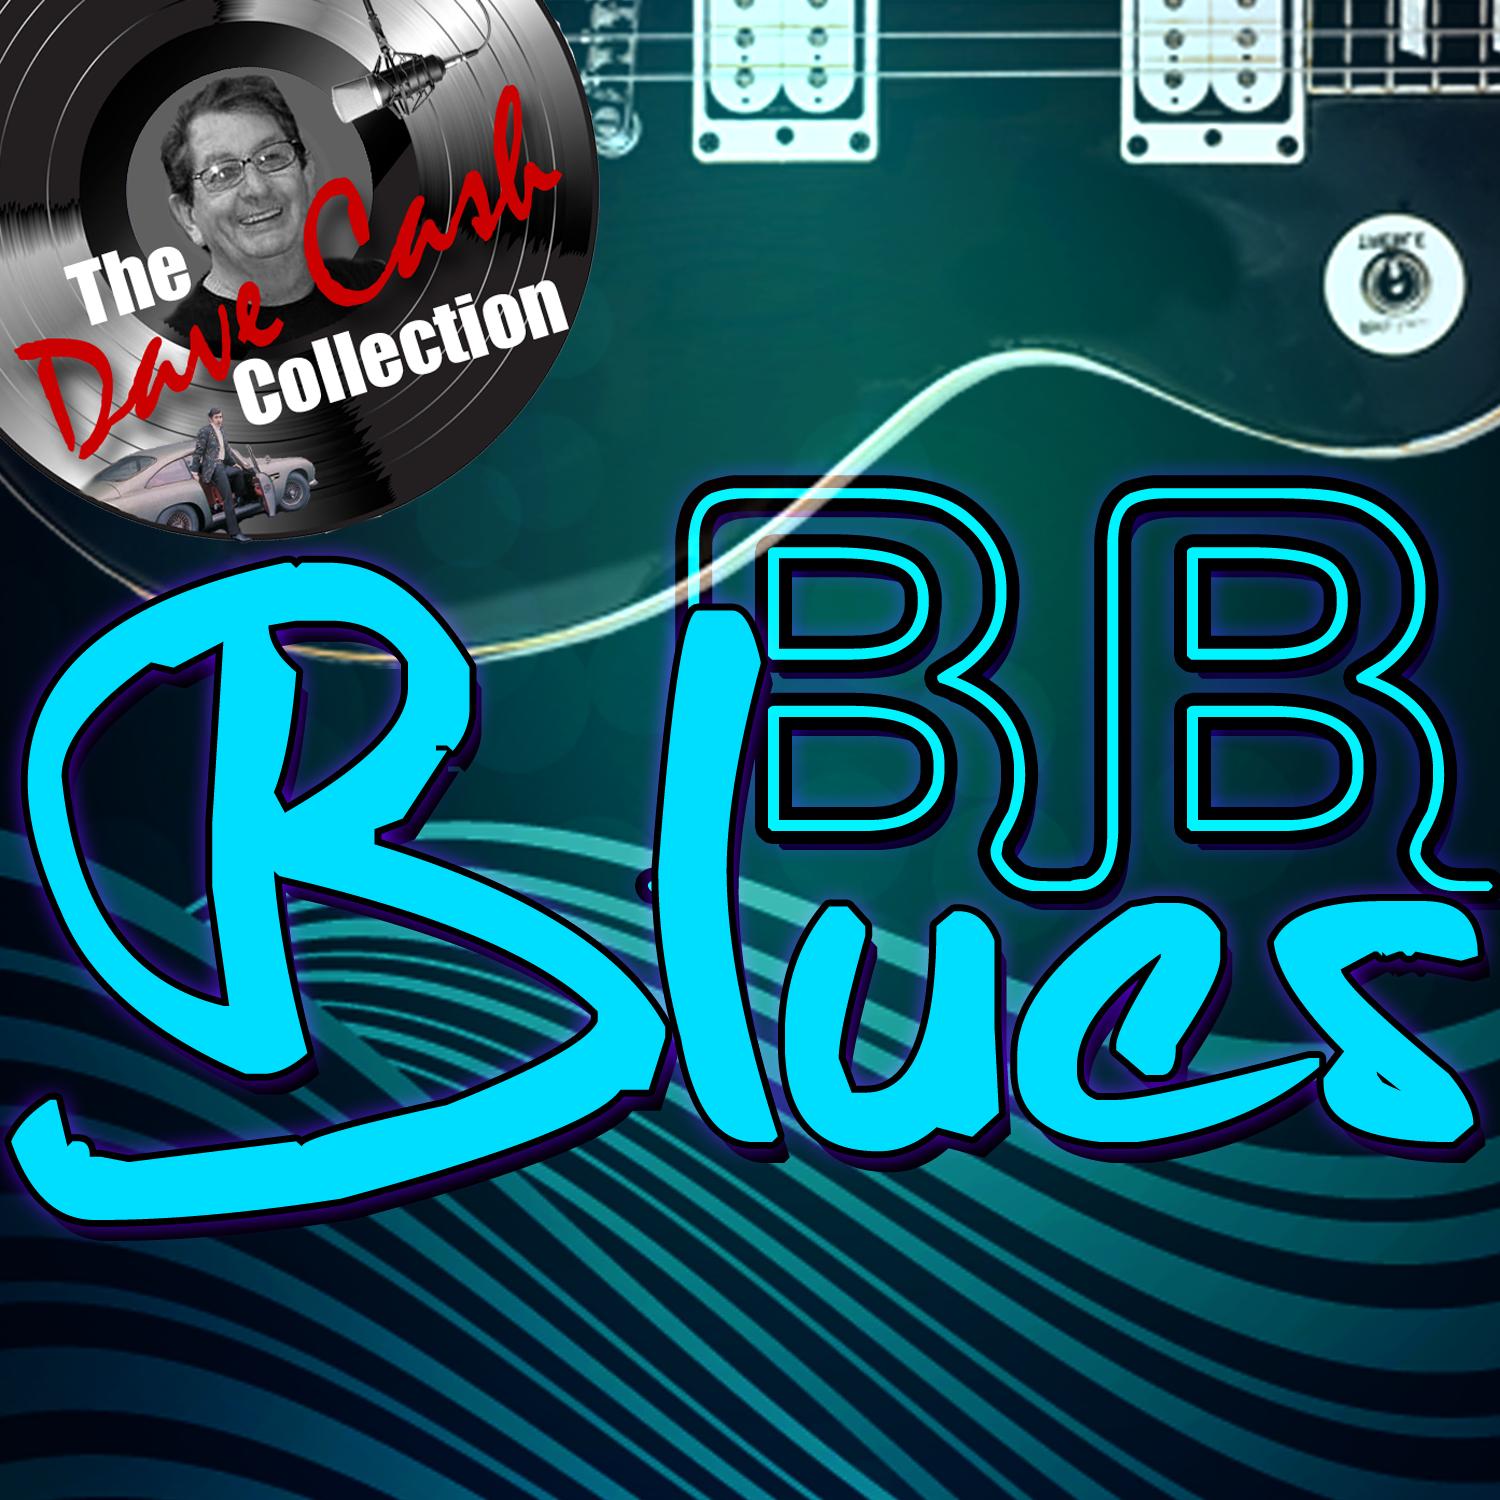 B.B. Blues (The Dave Cash Collection)